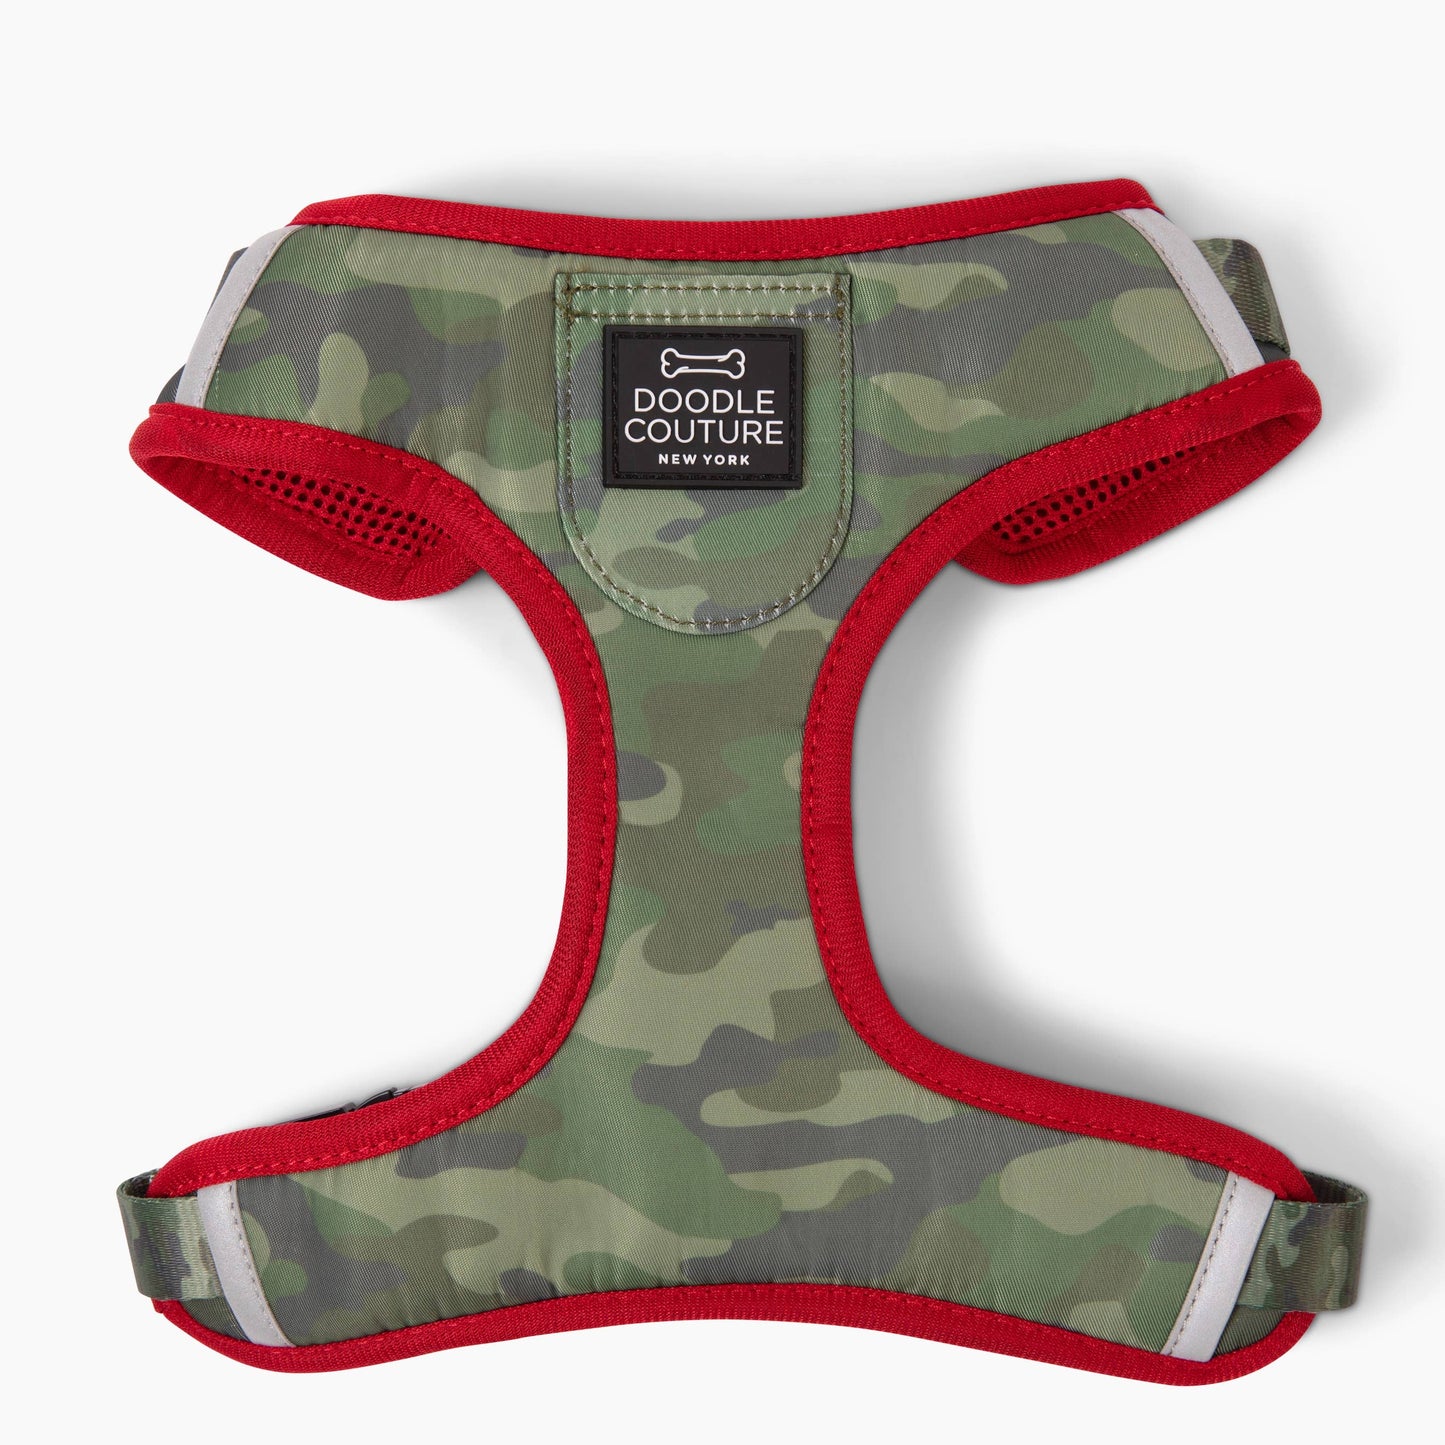 Doodle Couture, New York - Modern Camo Adjustable Harness XSmall Image